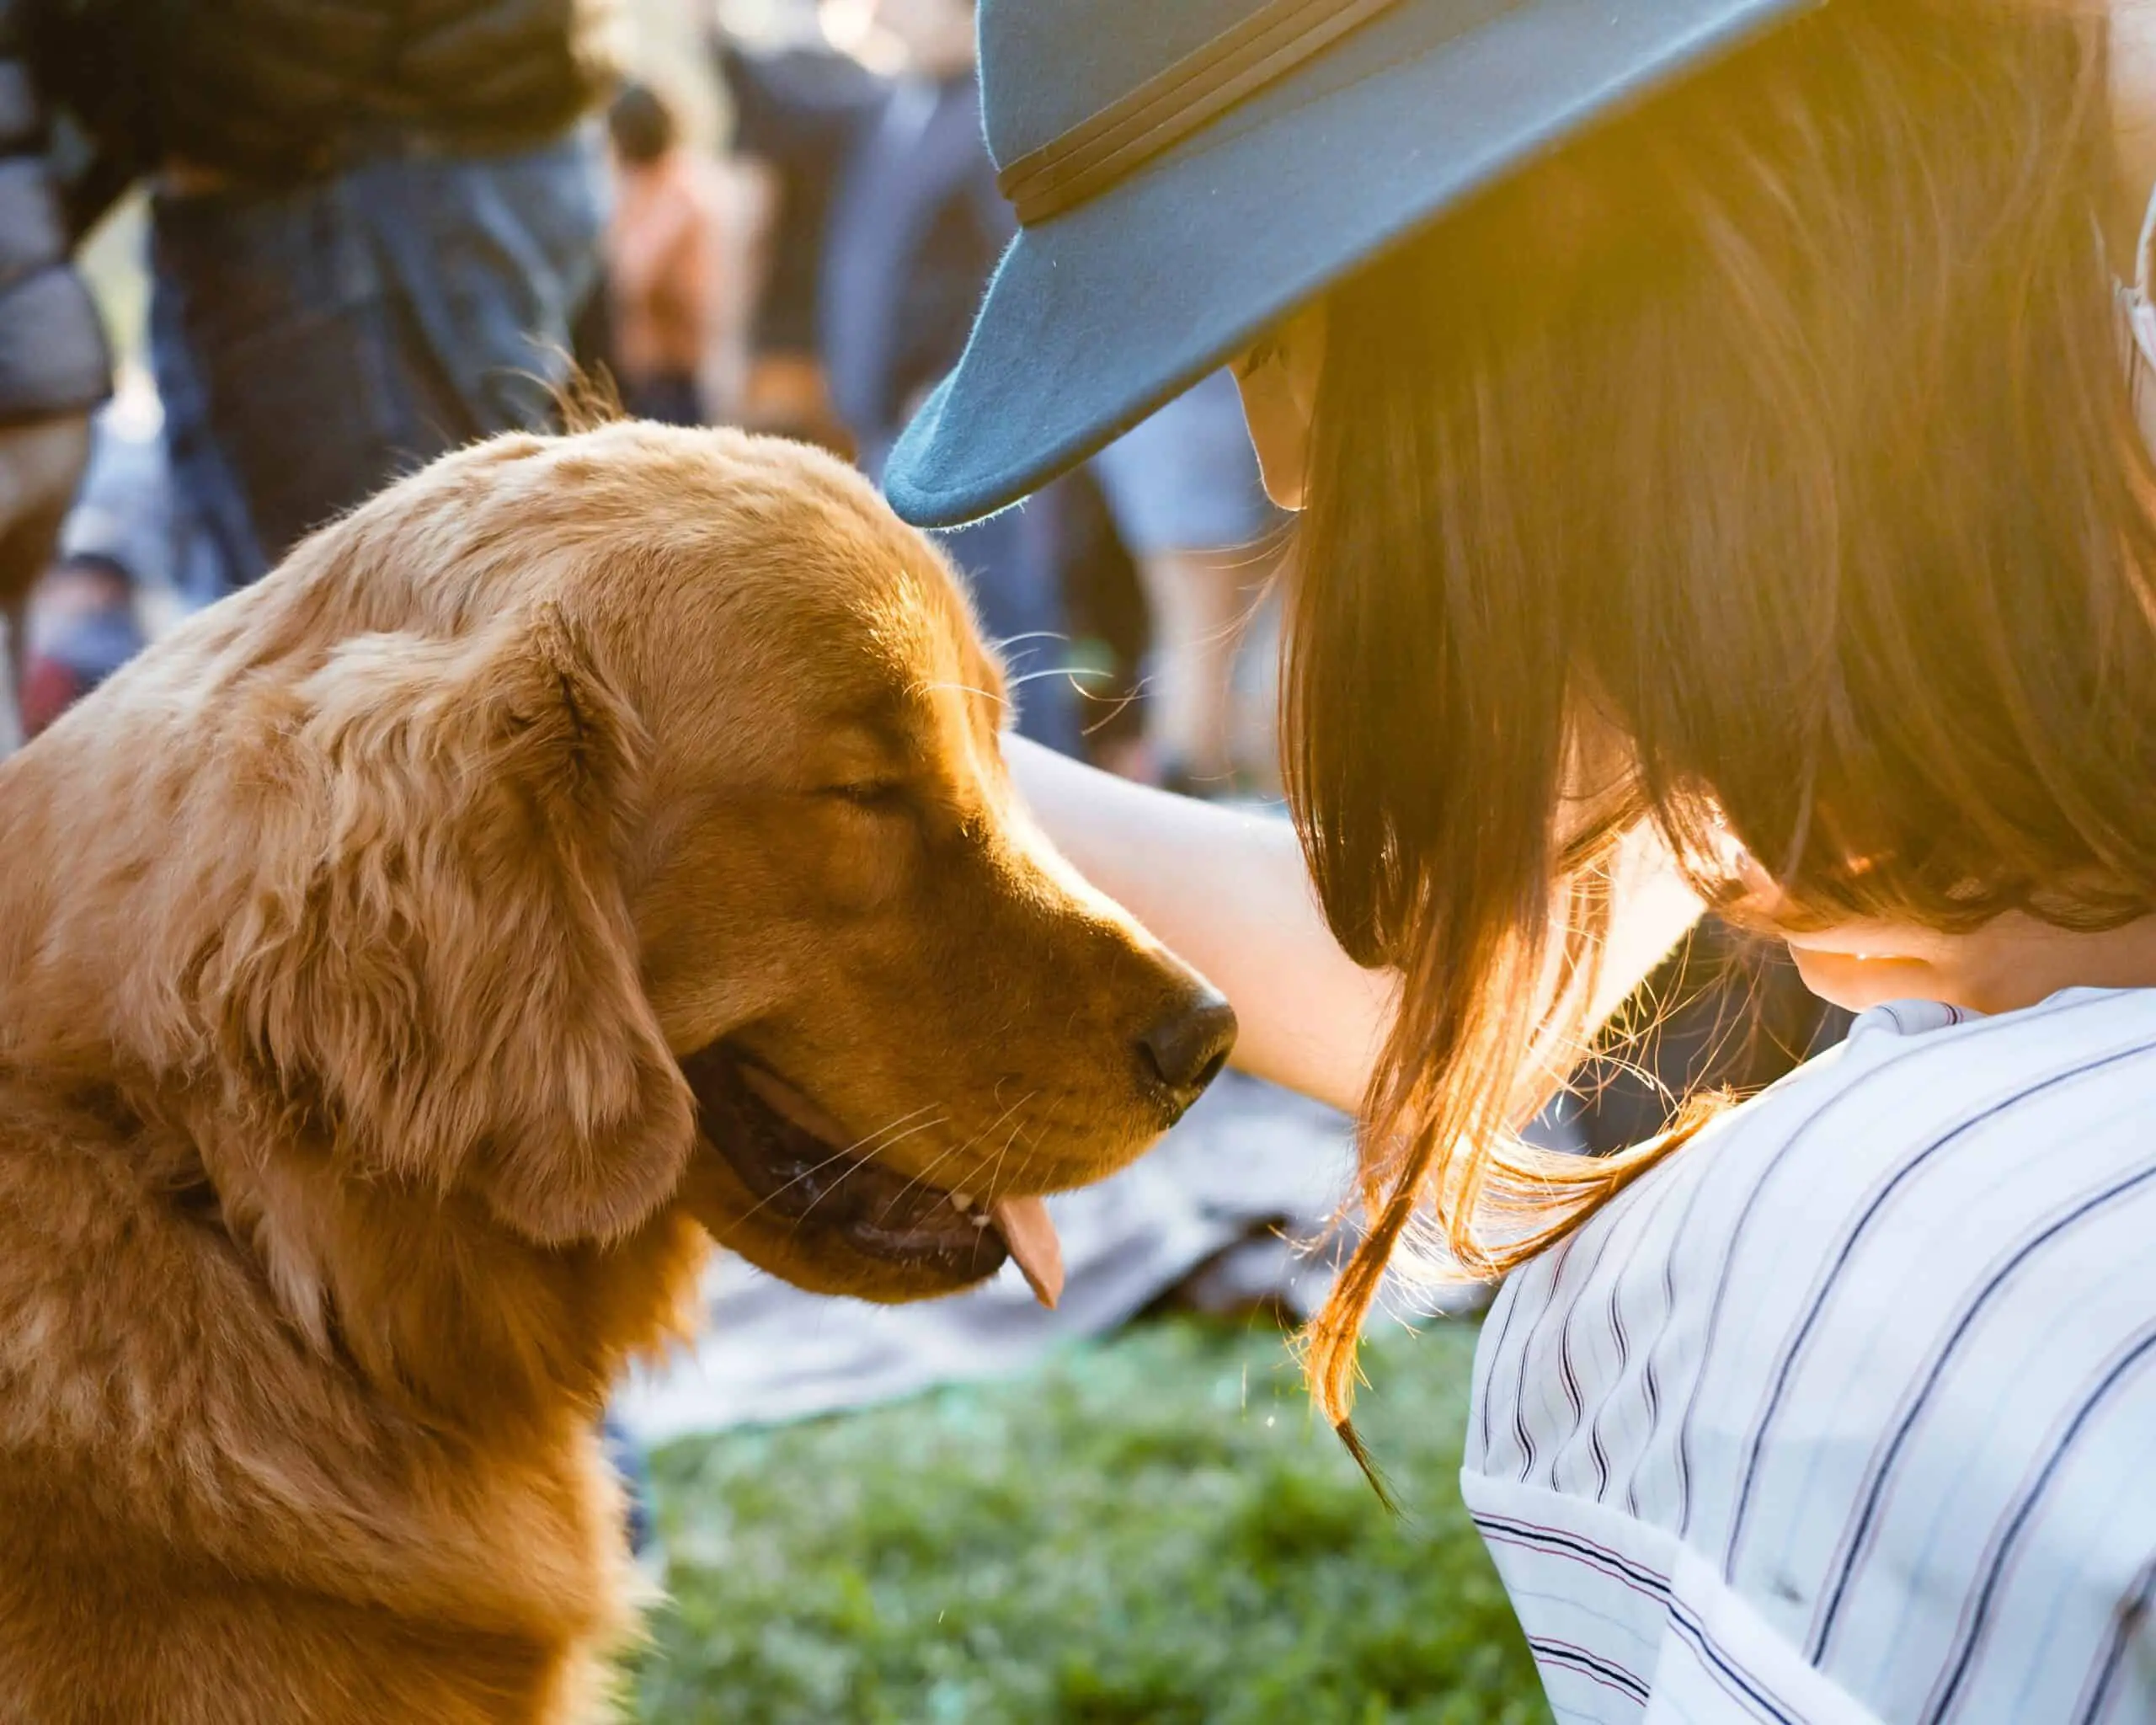 Airbnb’s official policy states that service animals are allowed in all stays, even if the guest doesn’t mention them when renting. Hosts that do not allow pets are expected to accept service animals without question. Still, some hosts can find ways around this policy.